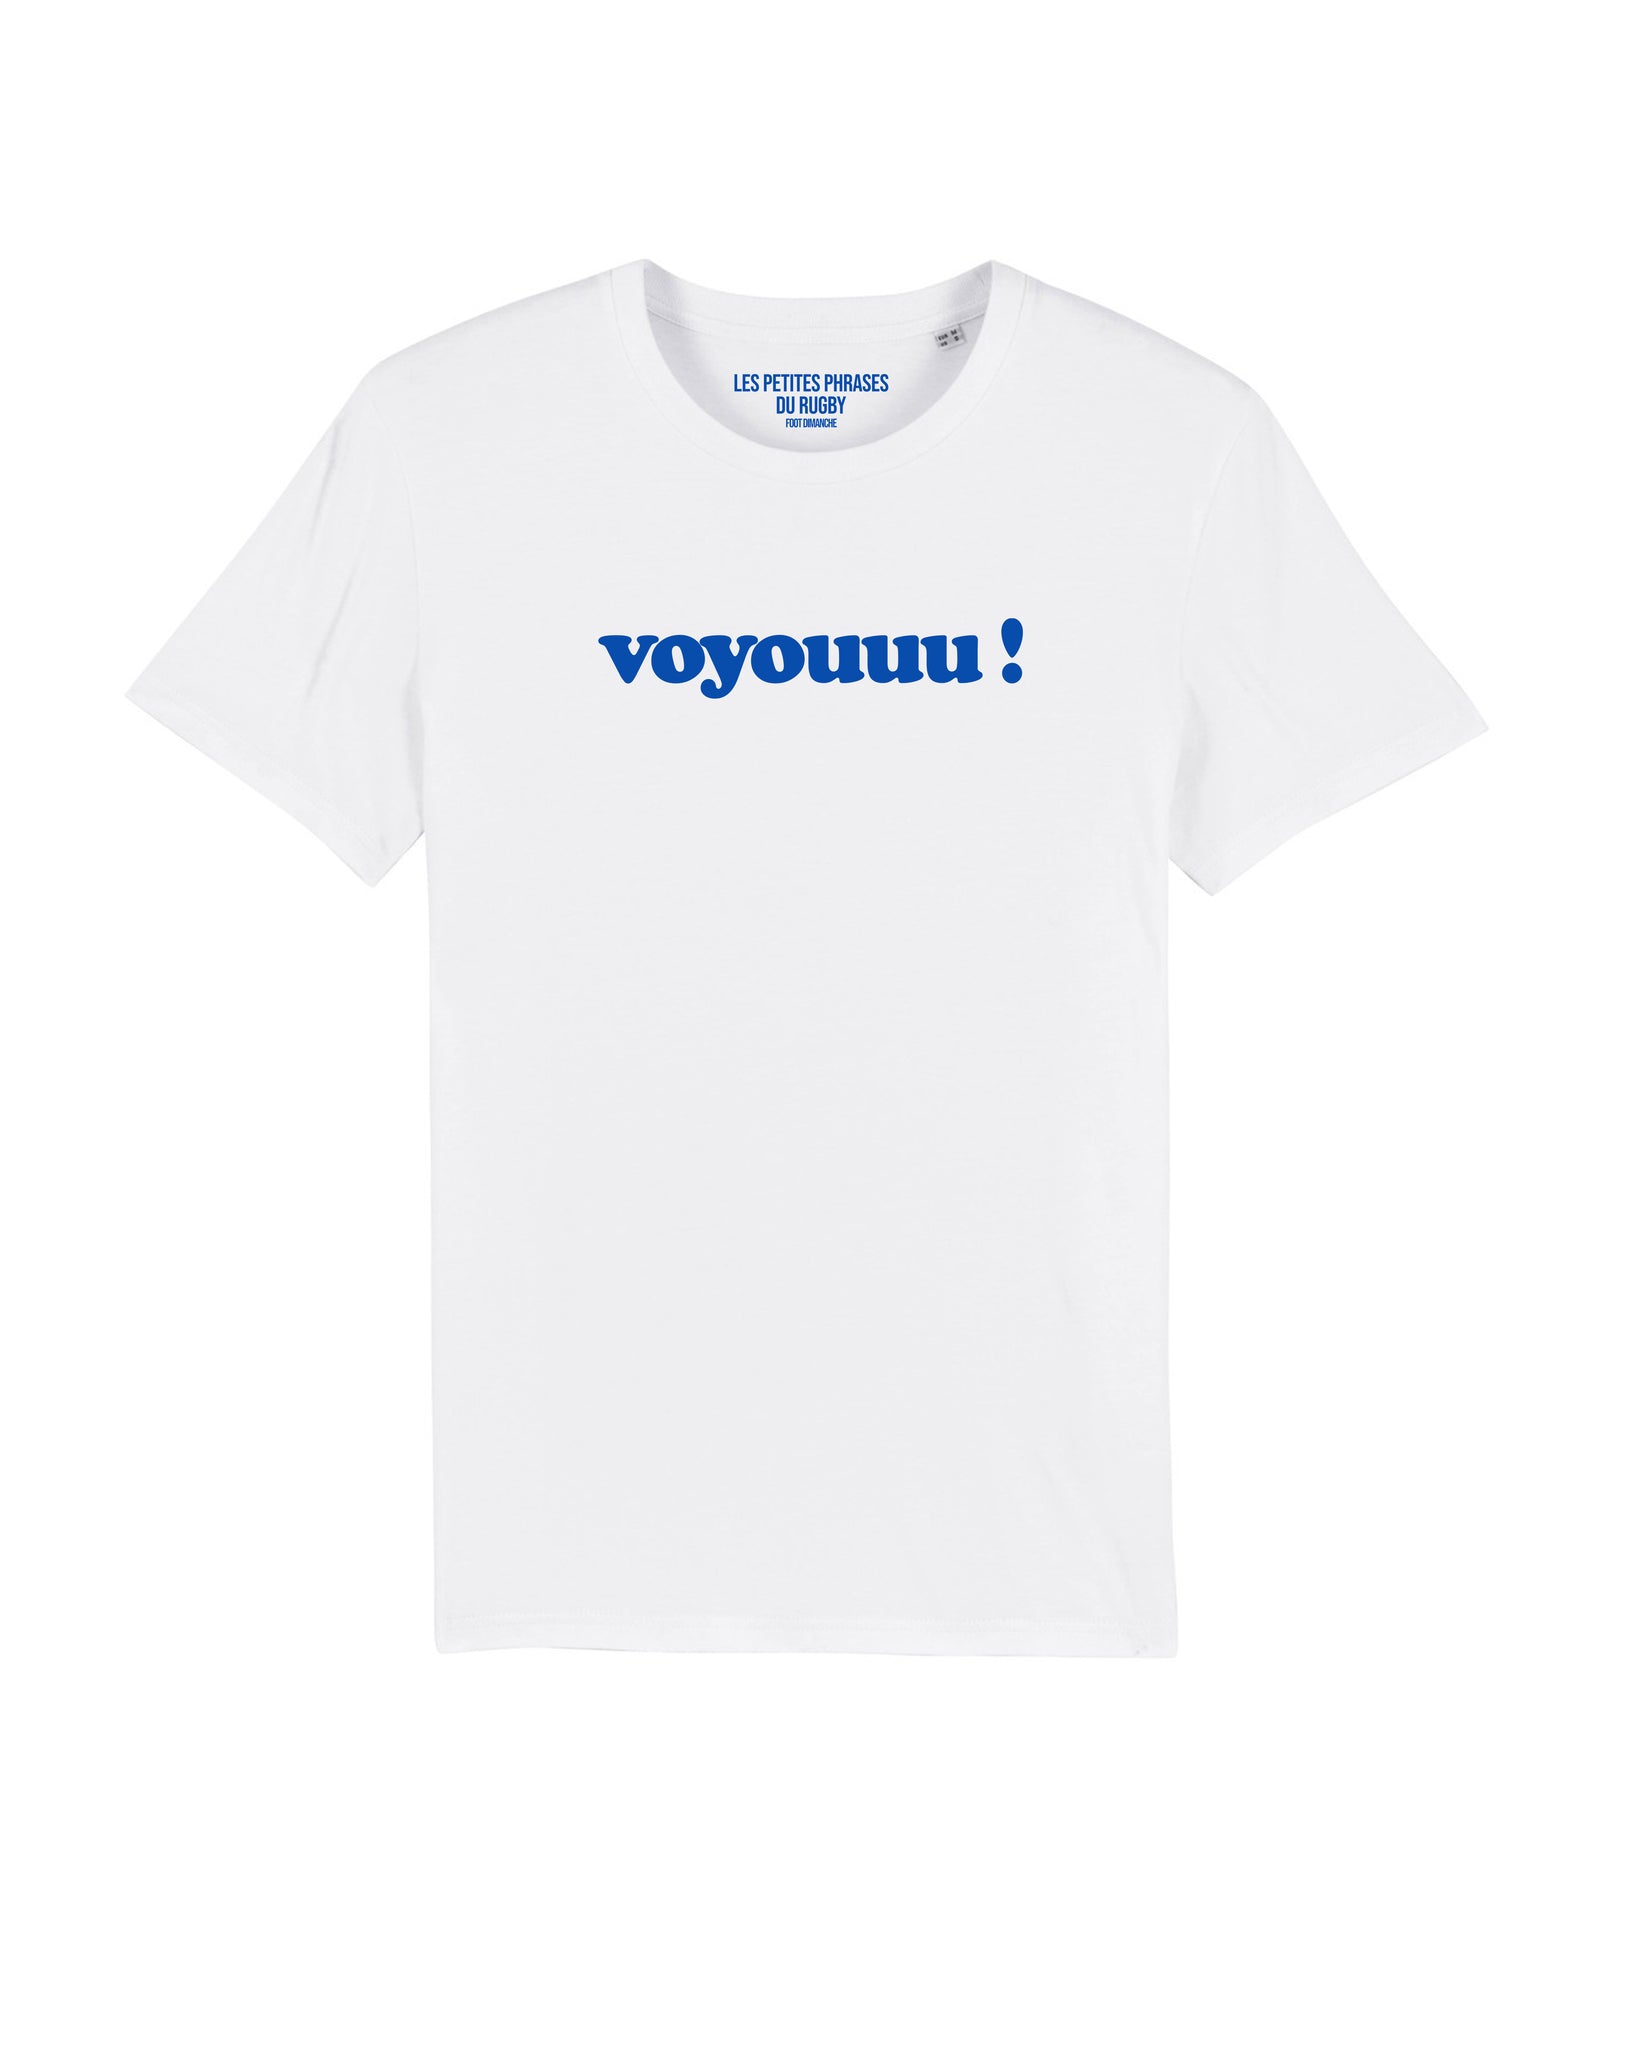 Tee Shirt voyou rugby